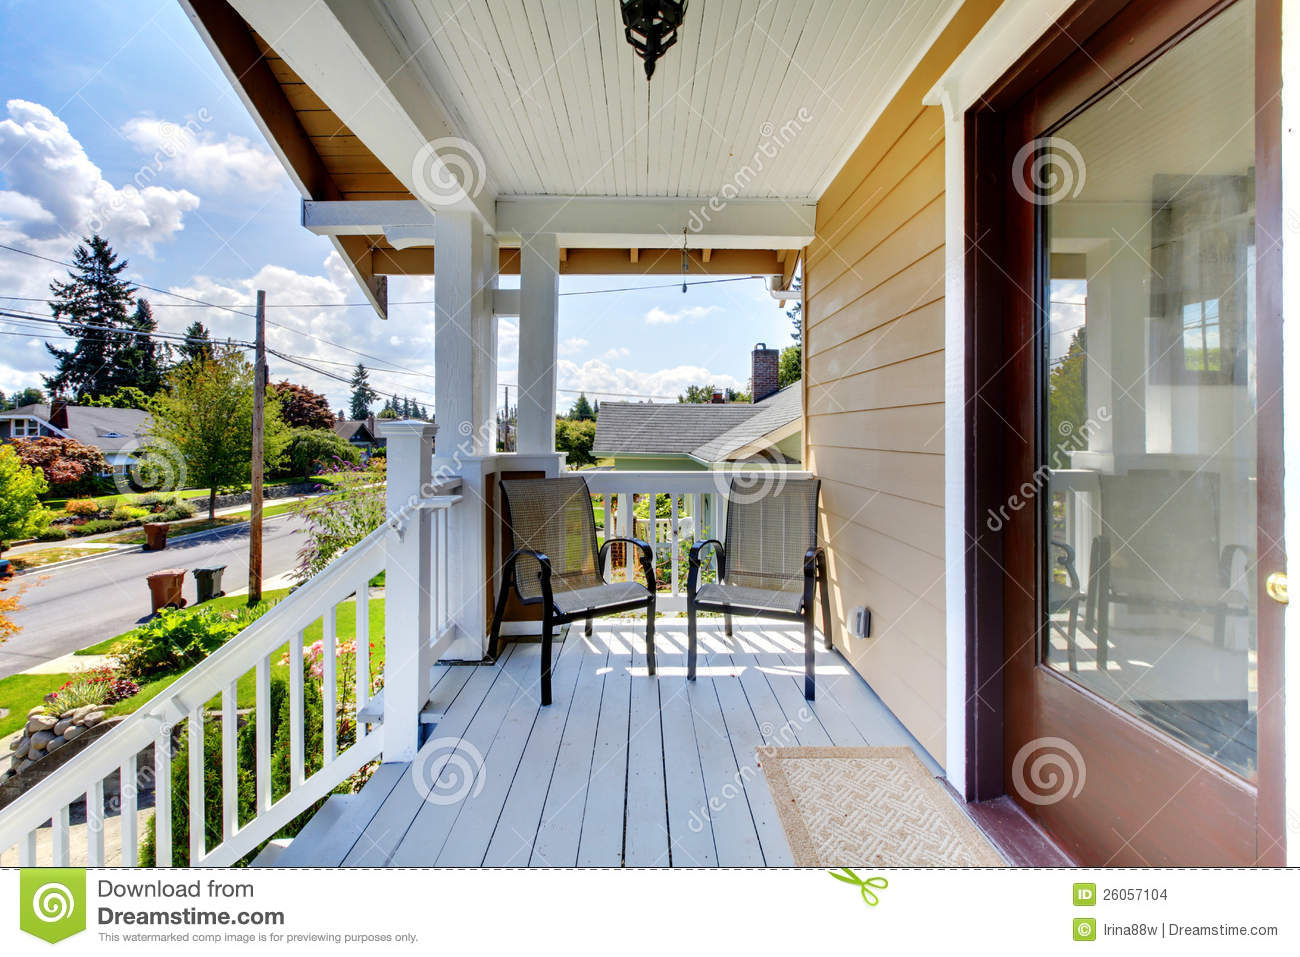 Front Door Entrance With Steps And Two Chairs  Stock Images   Image